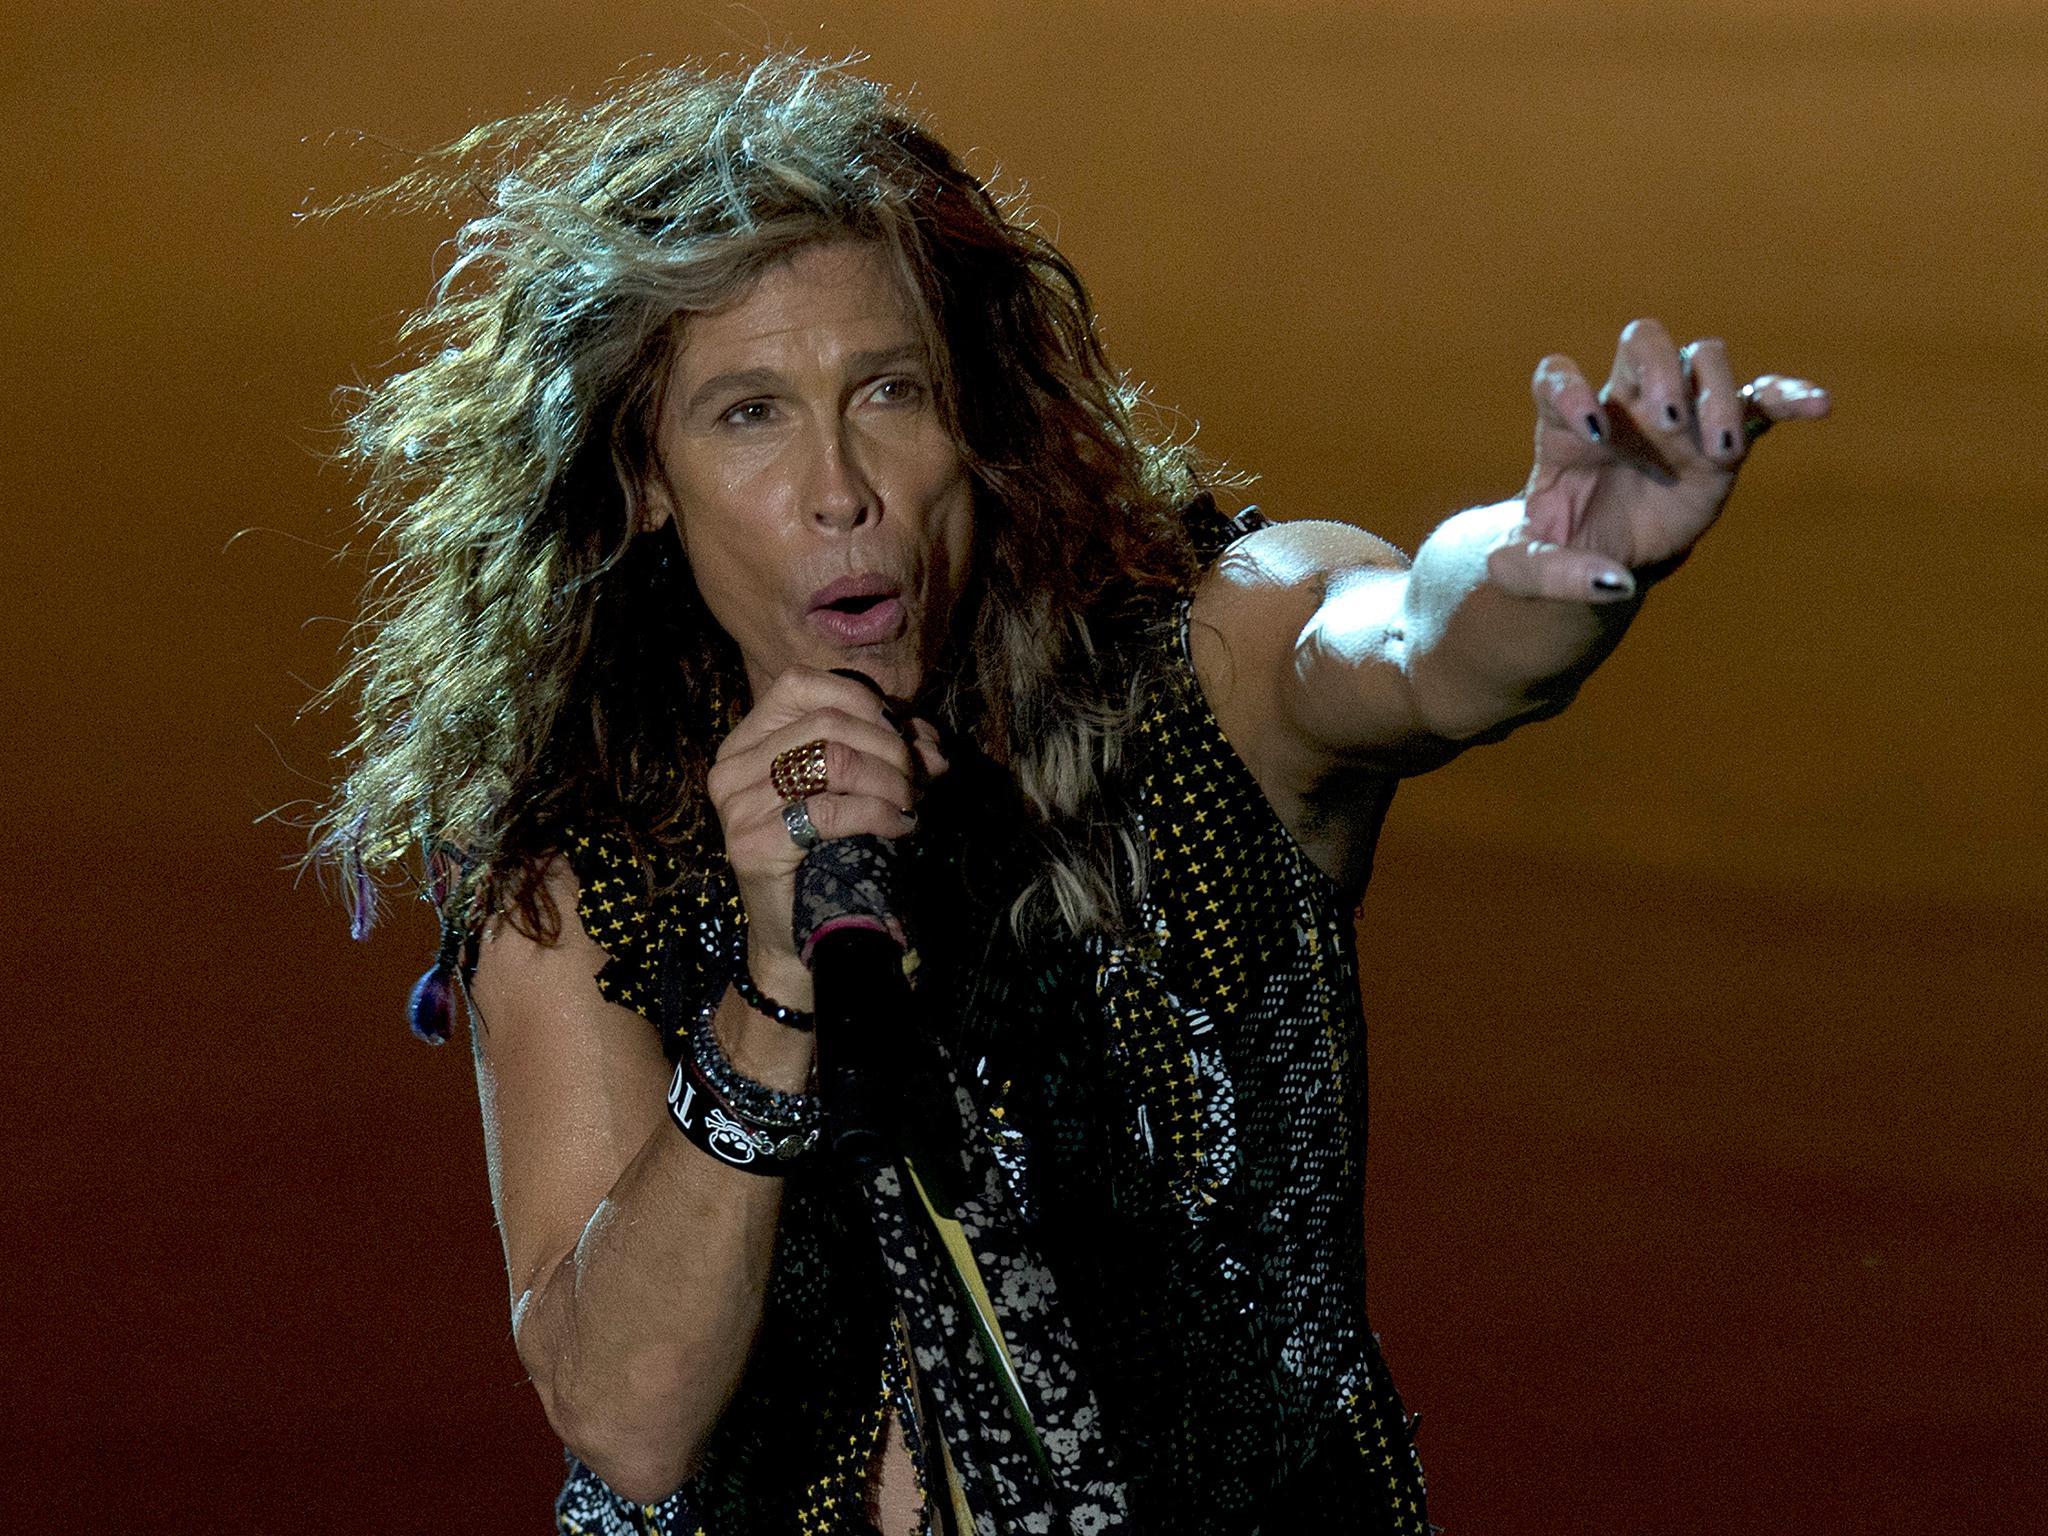 Aerosmith’s troubled personal life led to the release of their worst album